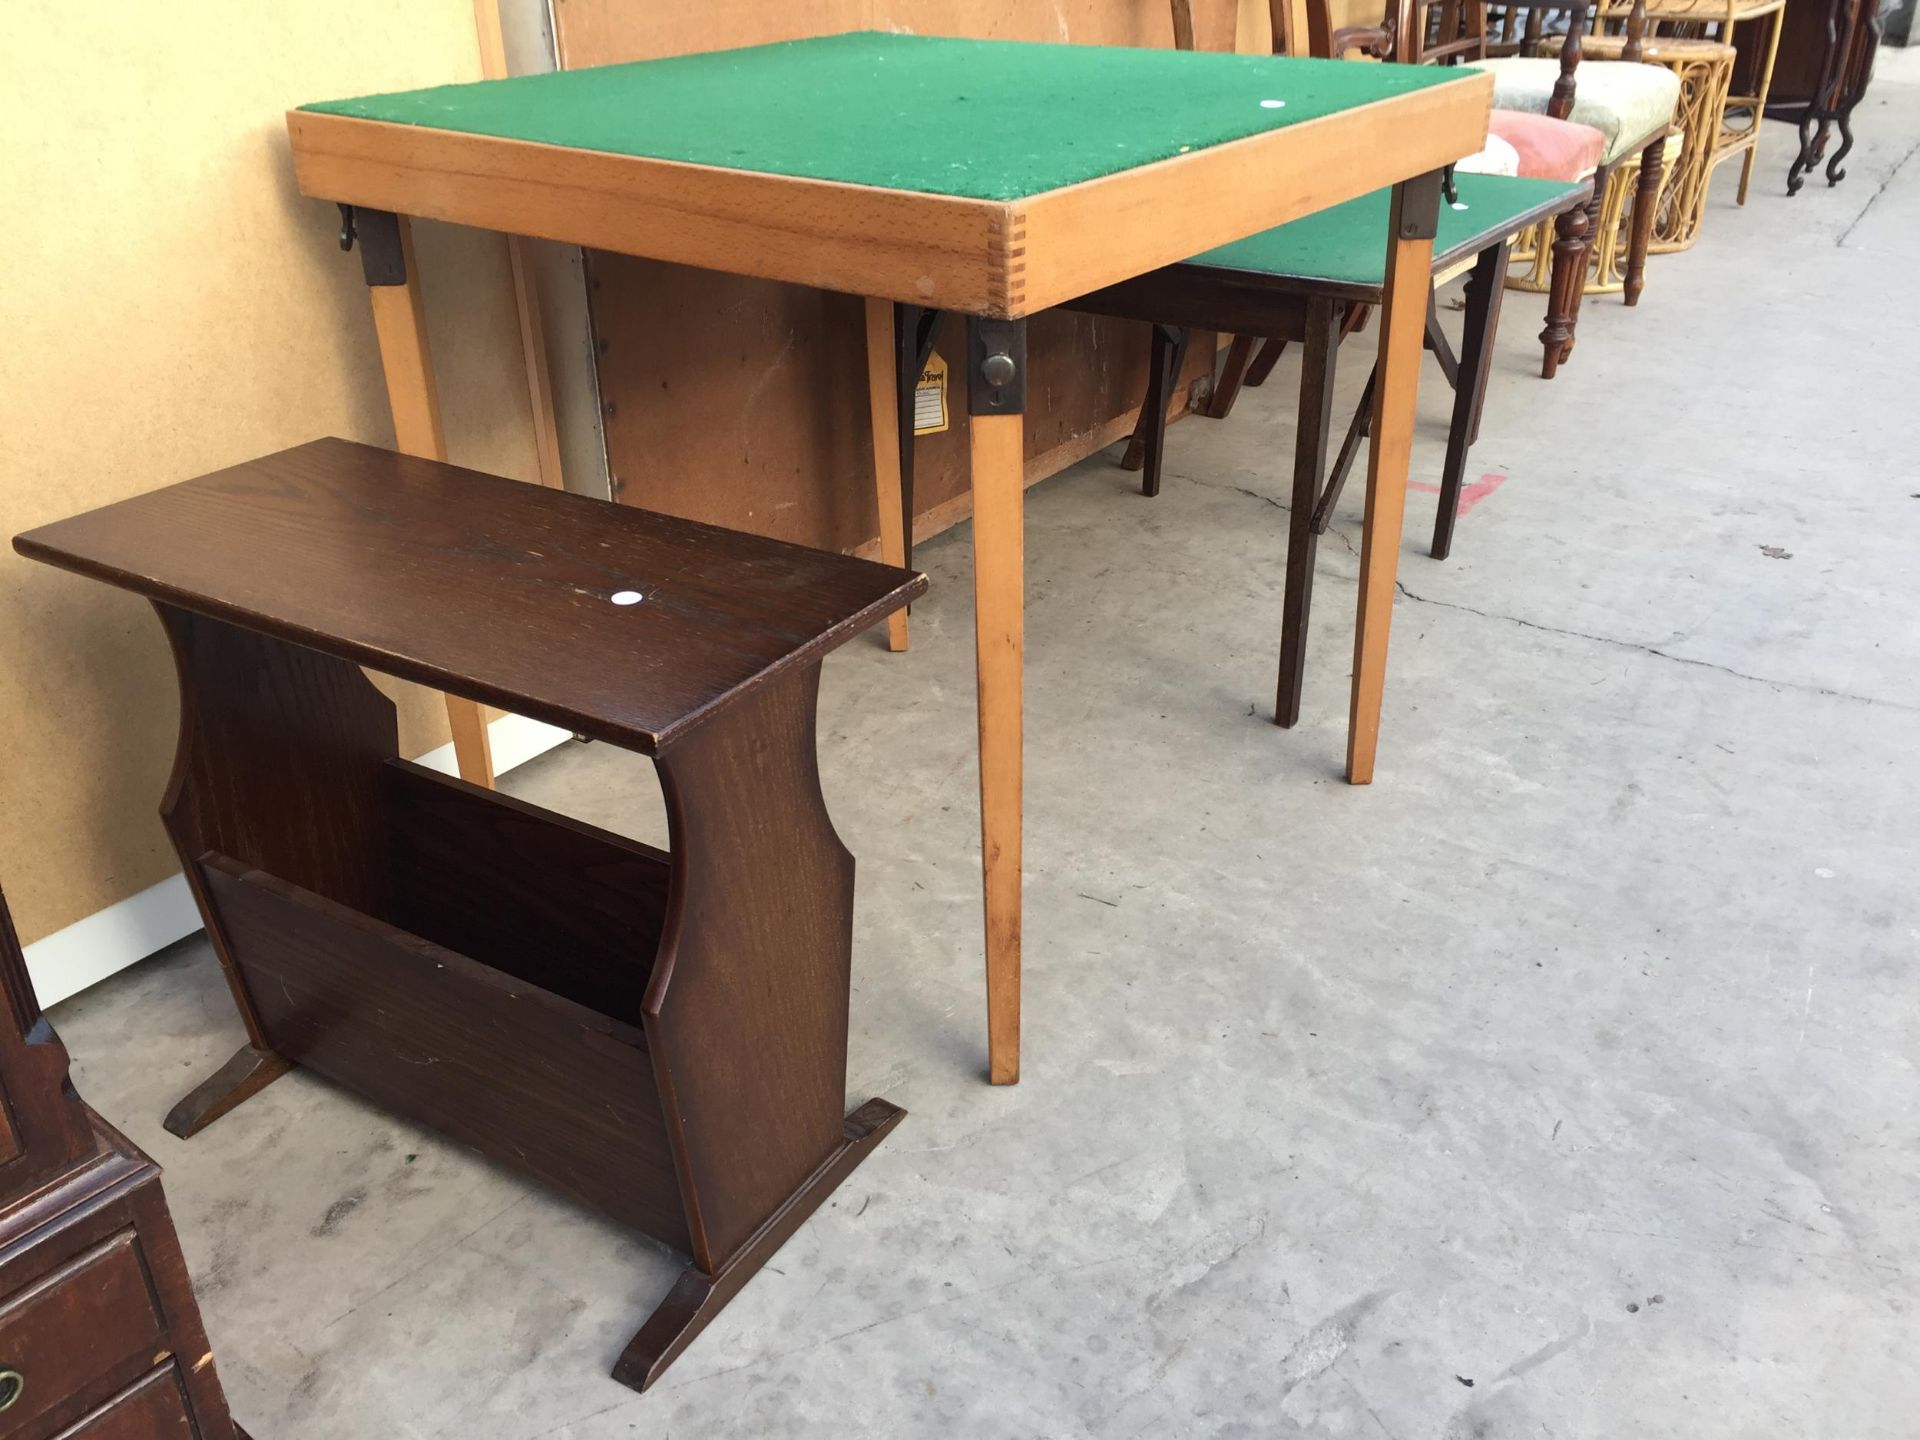 TWO FOLDING CARD TABLES AND A MAGAZINE RACK/TABLE - Image 2 of 2